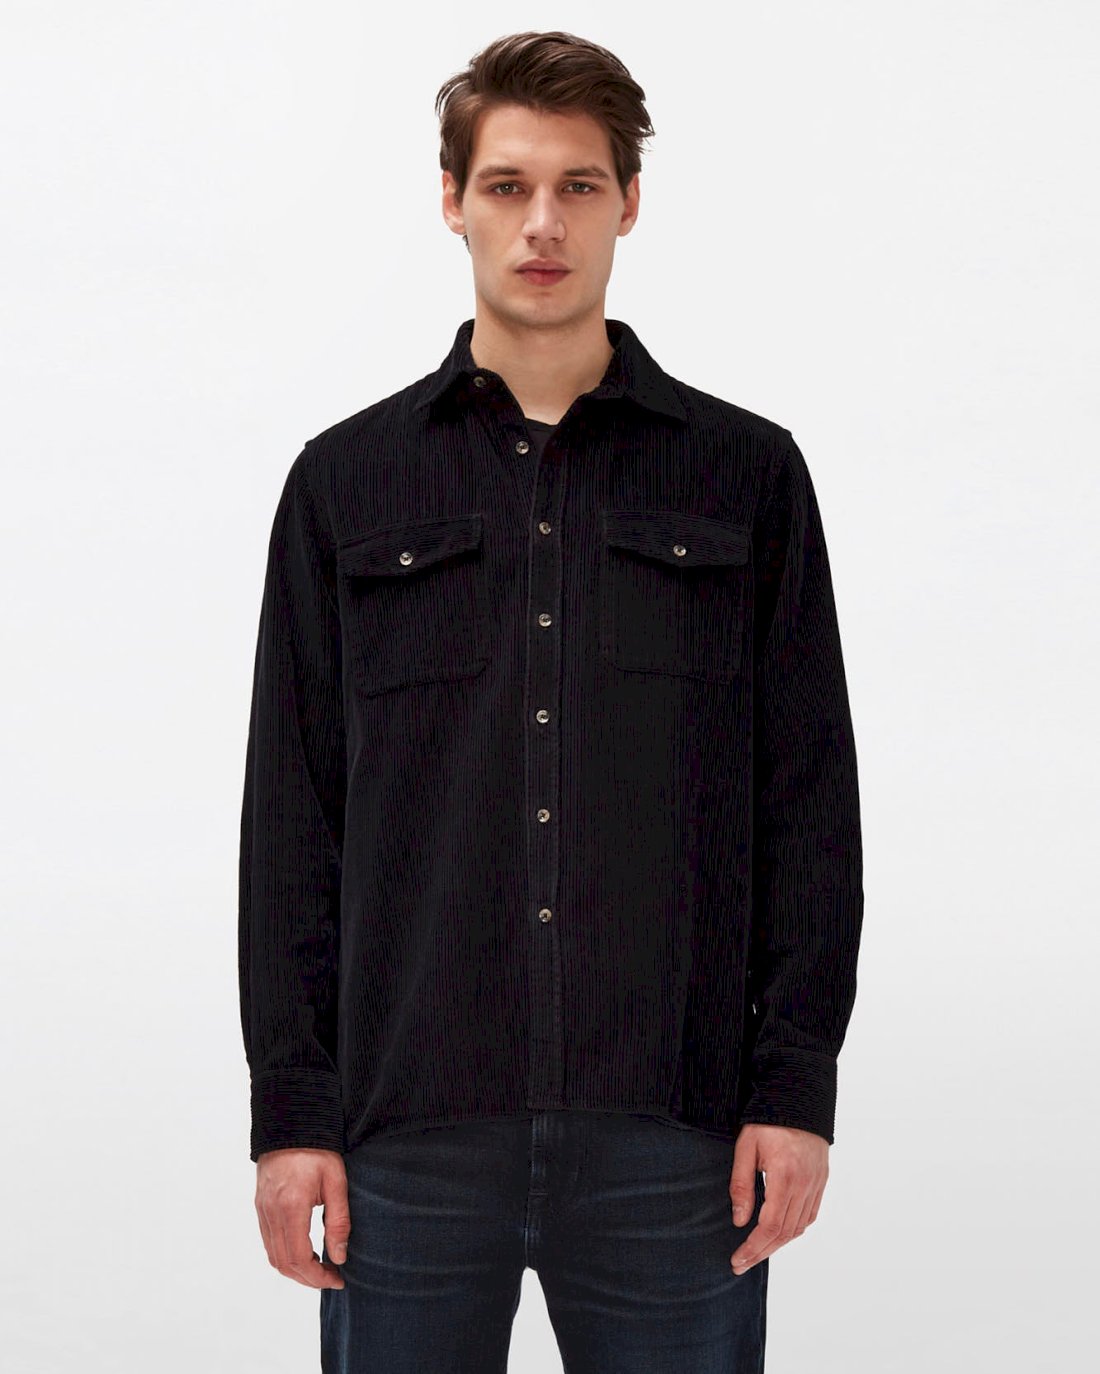 7 For All Mankind Corduroy Overshirt in Black 7M905422BLK